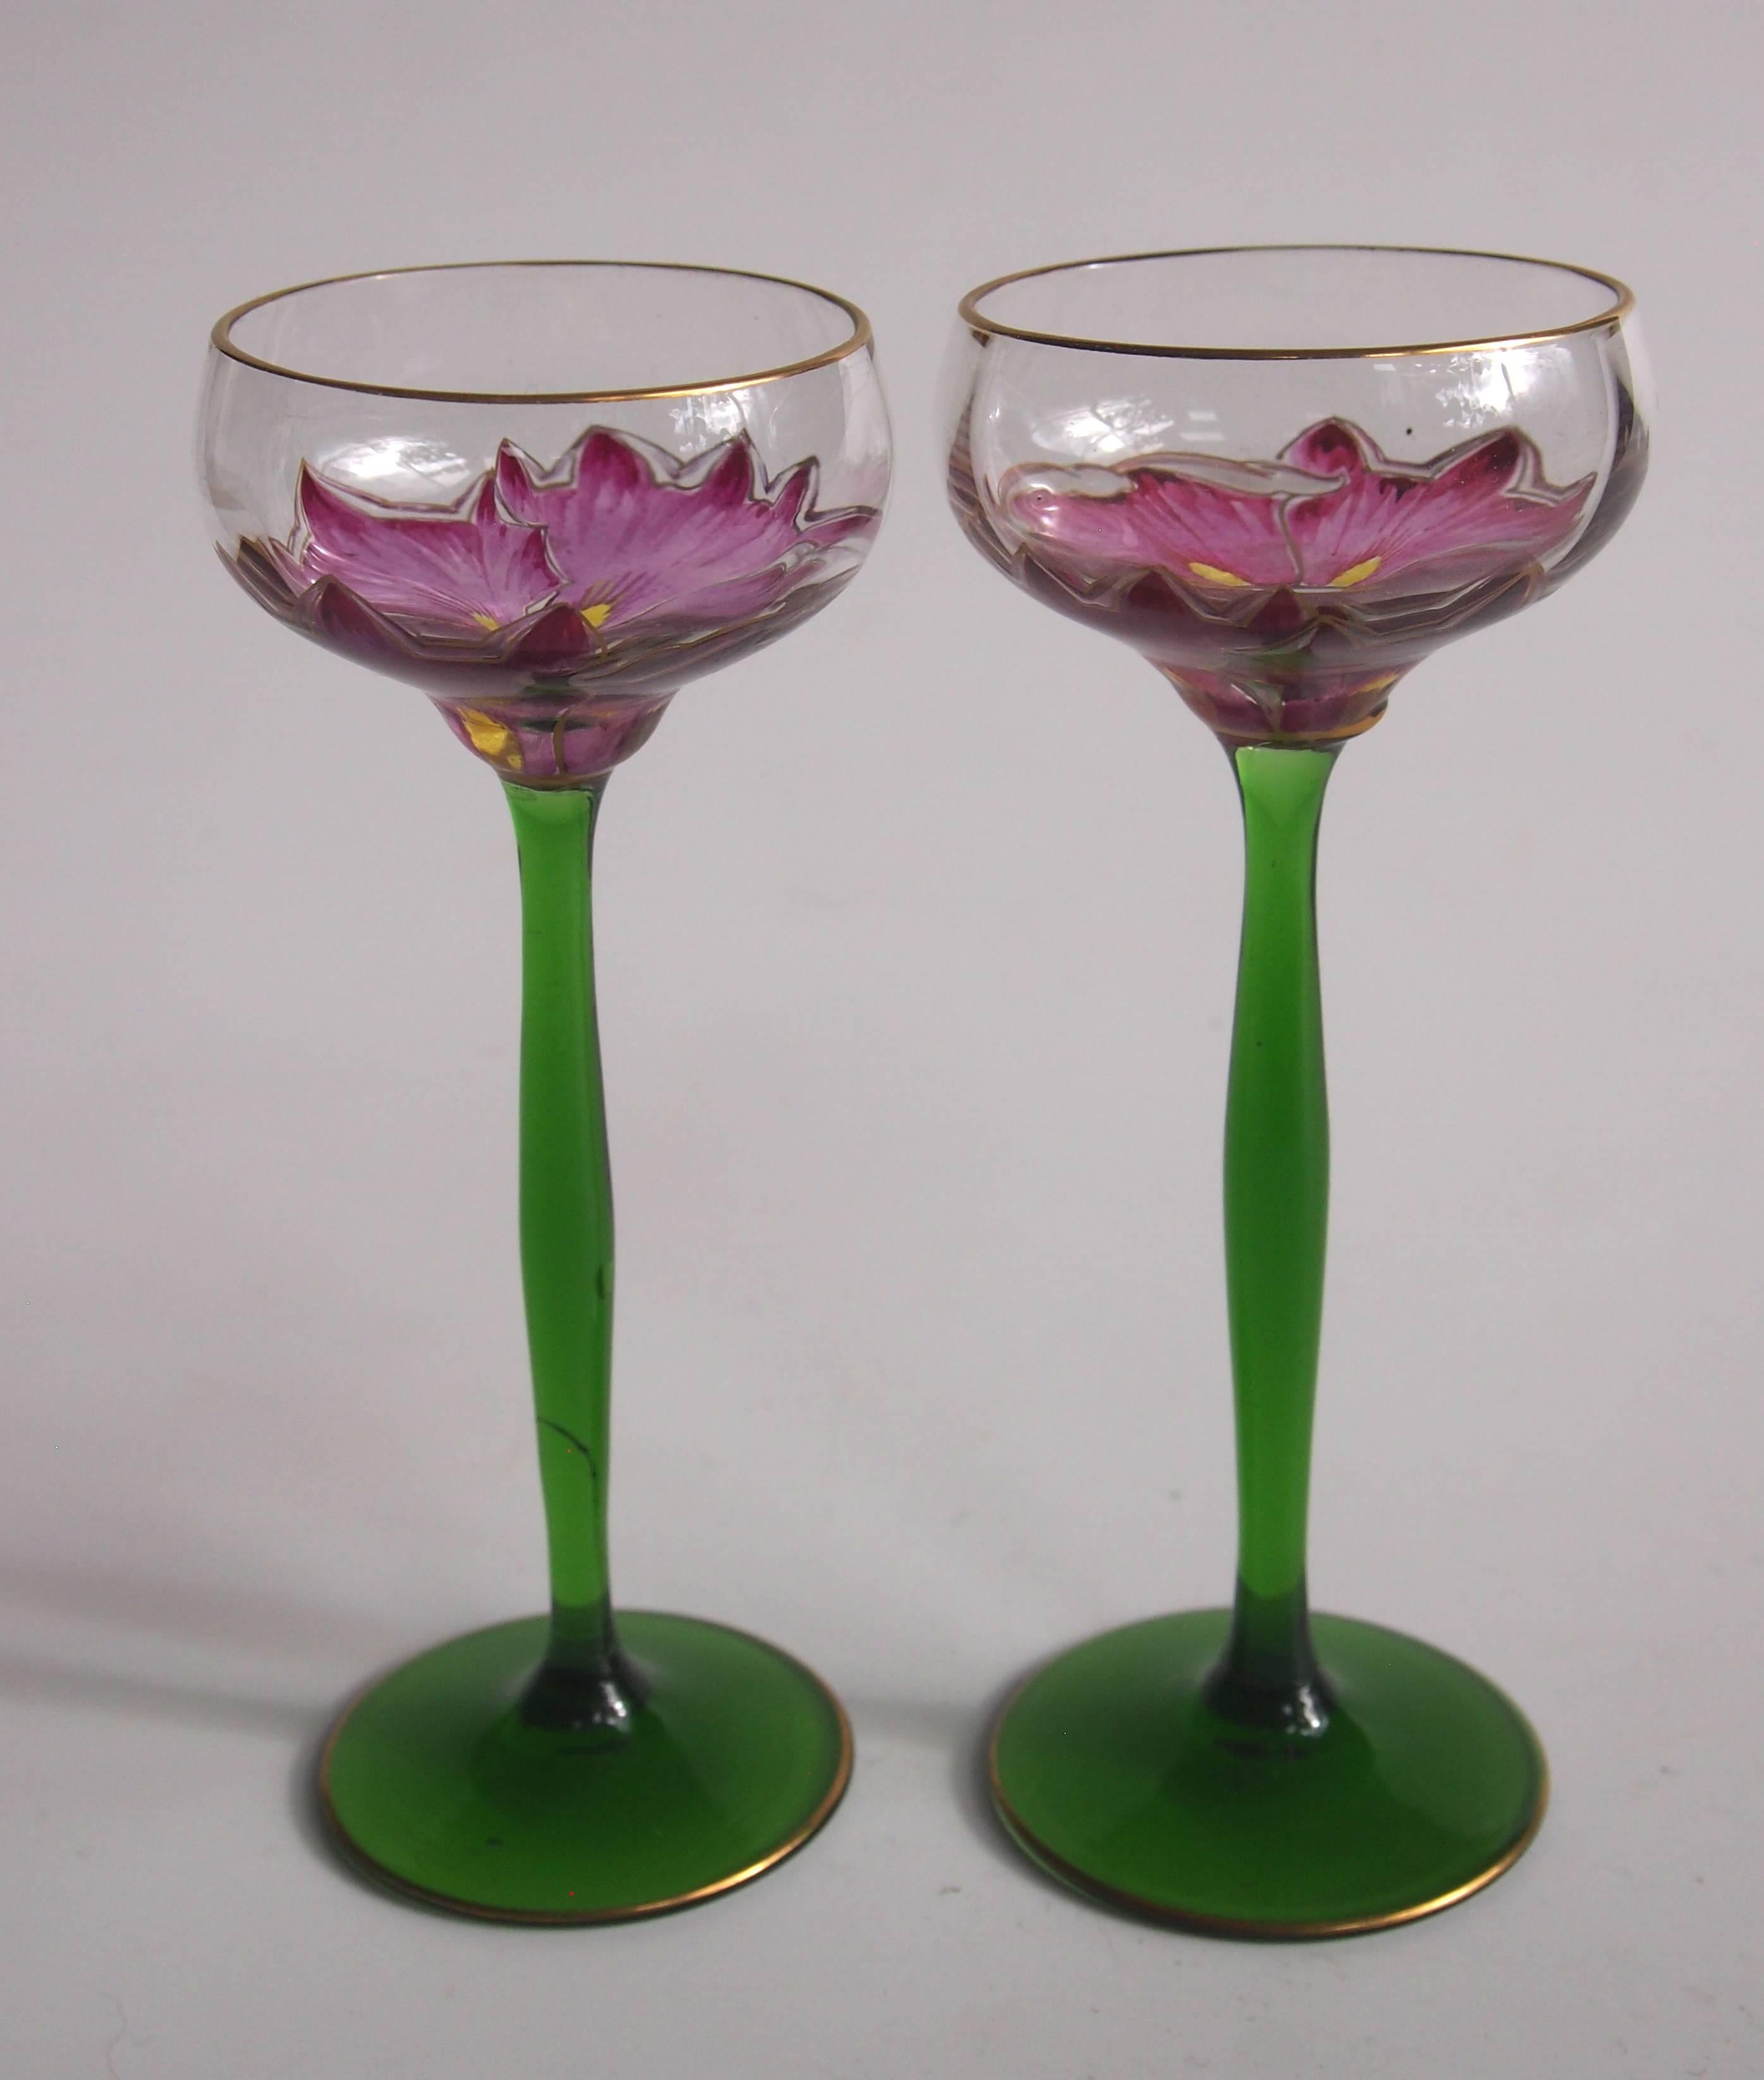 Super pair of Art Nouveau gilded, green stemmed and enameled, Meyr's Neffe 'Flower' glasses. They are enameled with an open flower around the bowl so only when you drink from them do you get the full effect of the flower. 

'Flower' glasses were a